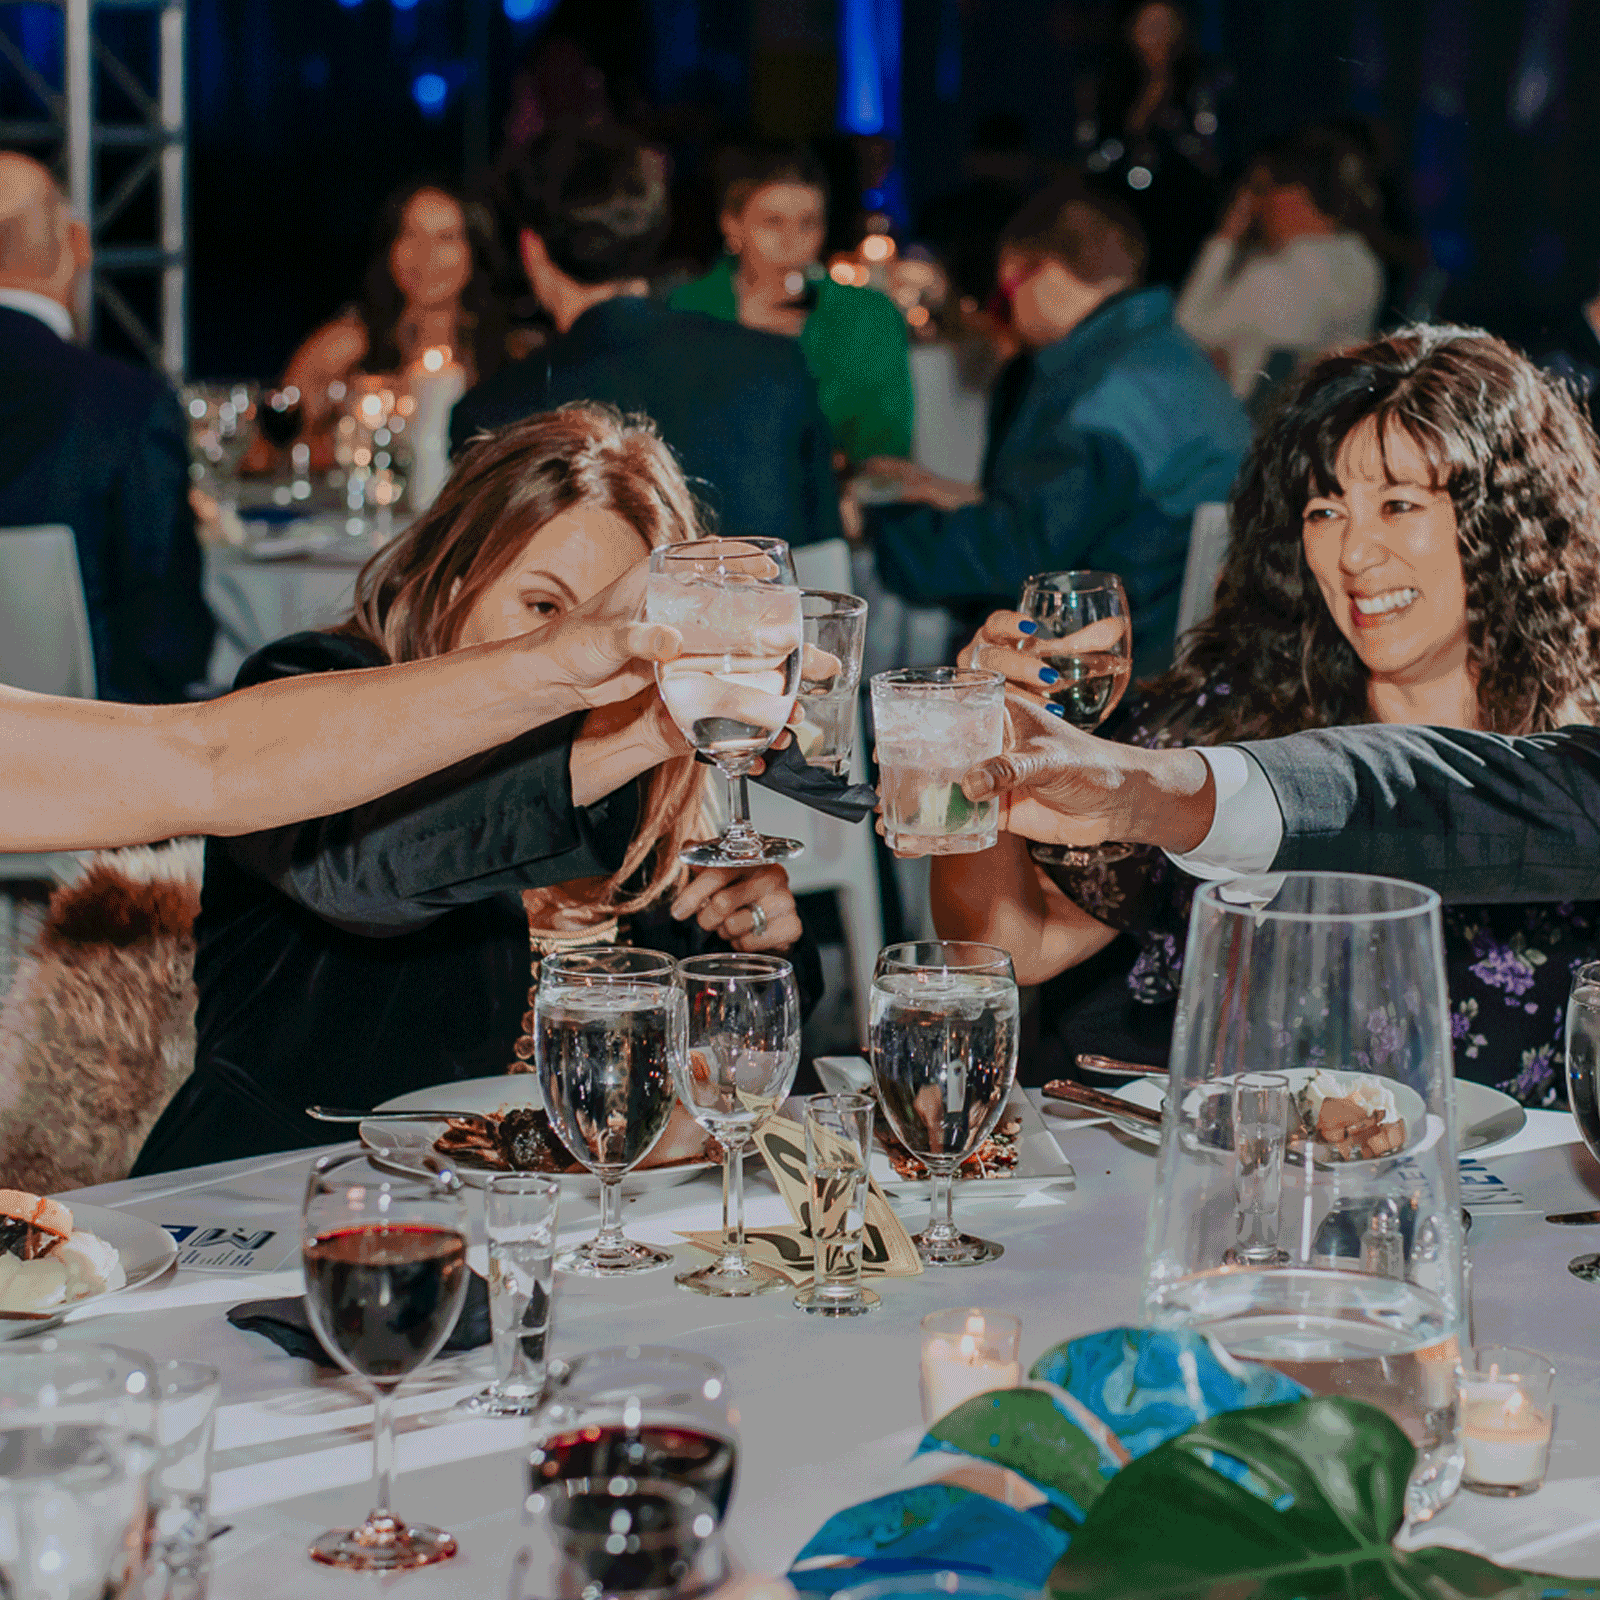 Rotating images captured at a gala: people raising their glasses, lettered balloons, a DJ cast under a red hue, and a warehouse displaying artwork.